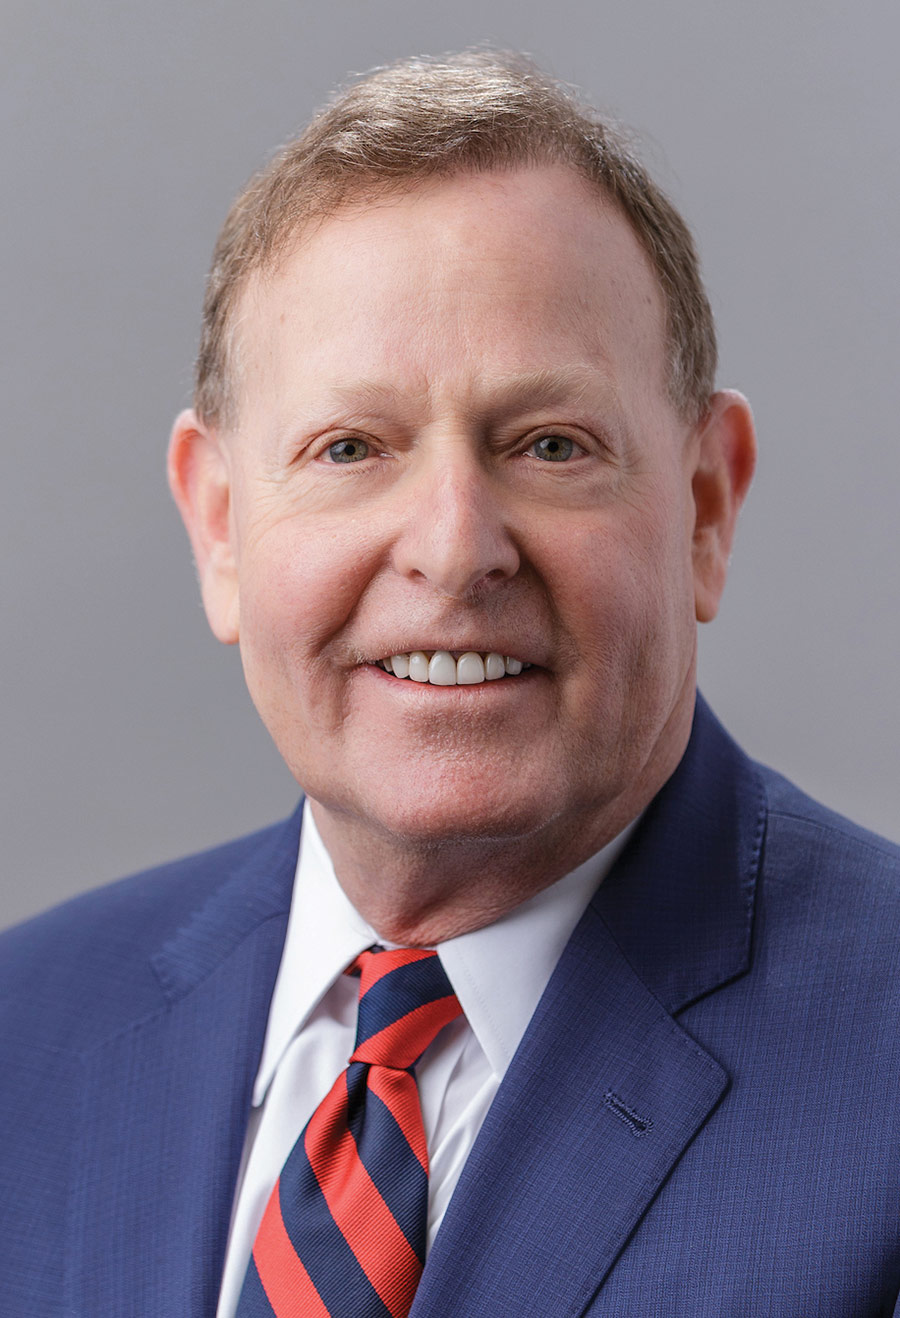 Portrait headshot photograph of Dr. Robert Barish smiling in a dark navy blue blazer suit and white button-up dress shirt underneath with a multi-colored pattern design tie (red/dark navy blue)